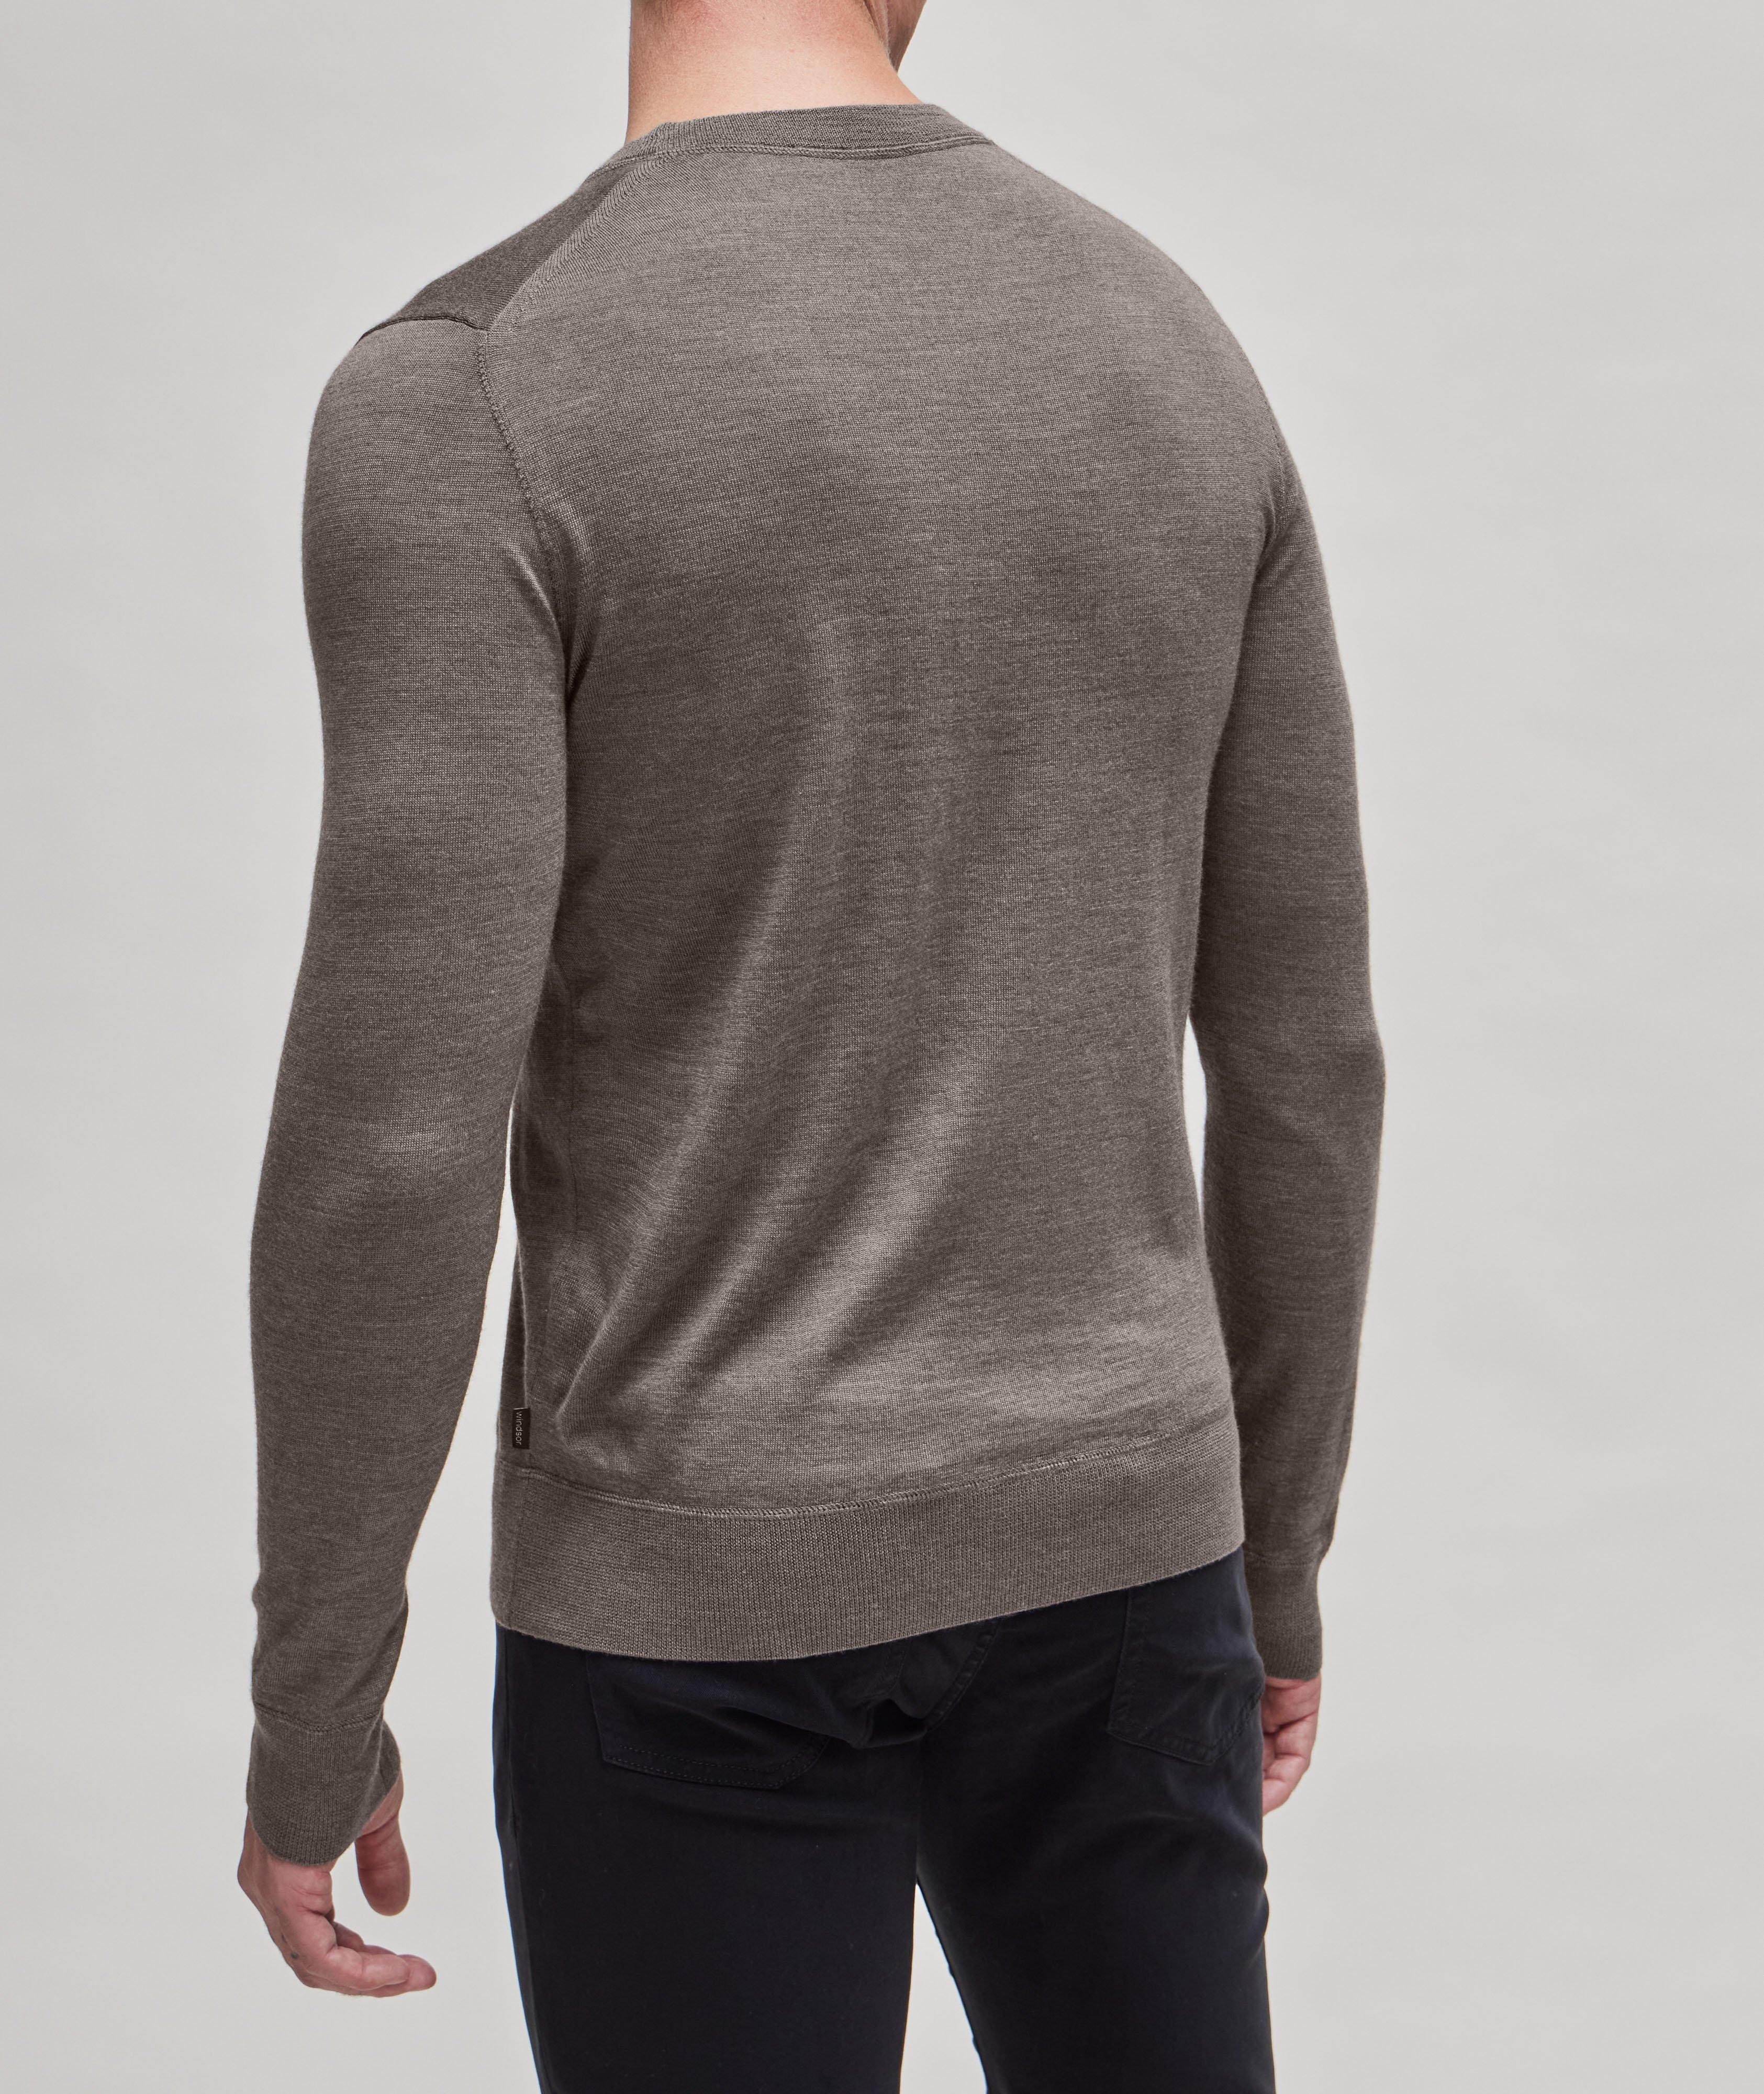 Nando Wool, Silk & Cashmere Knitted Sweater  image 2